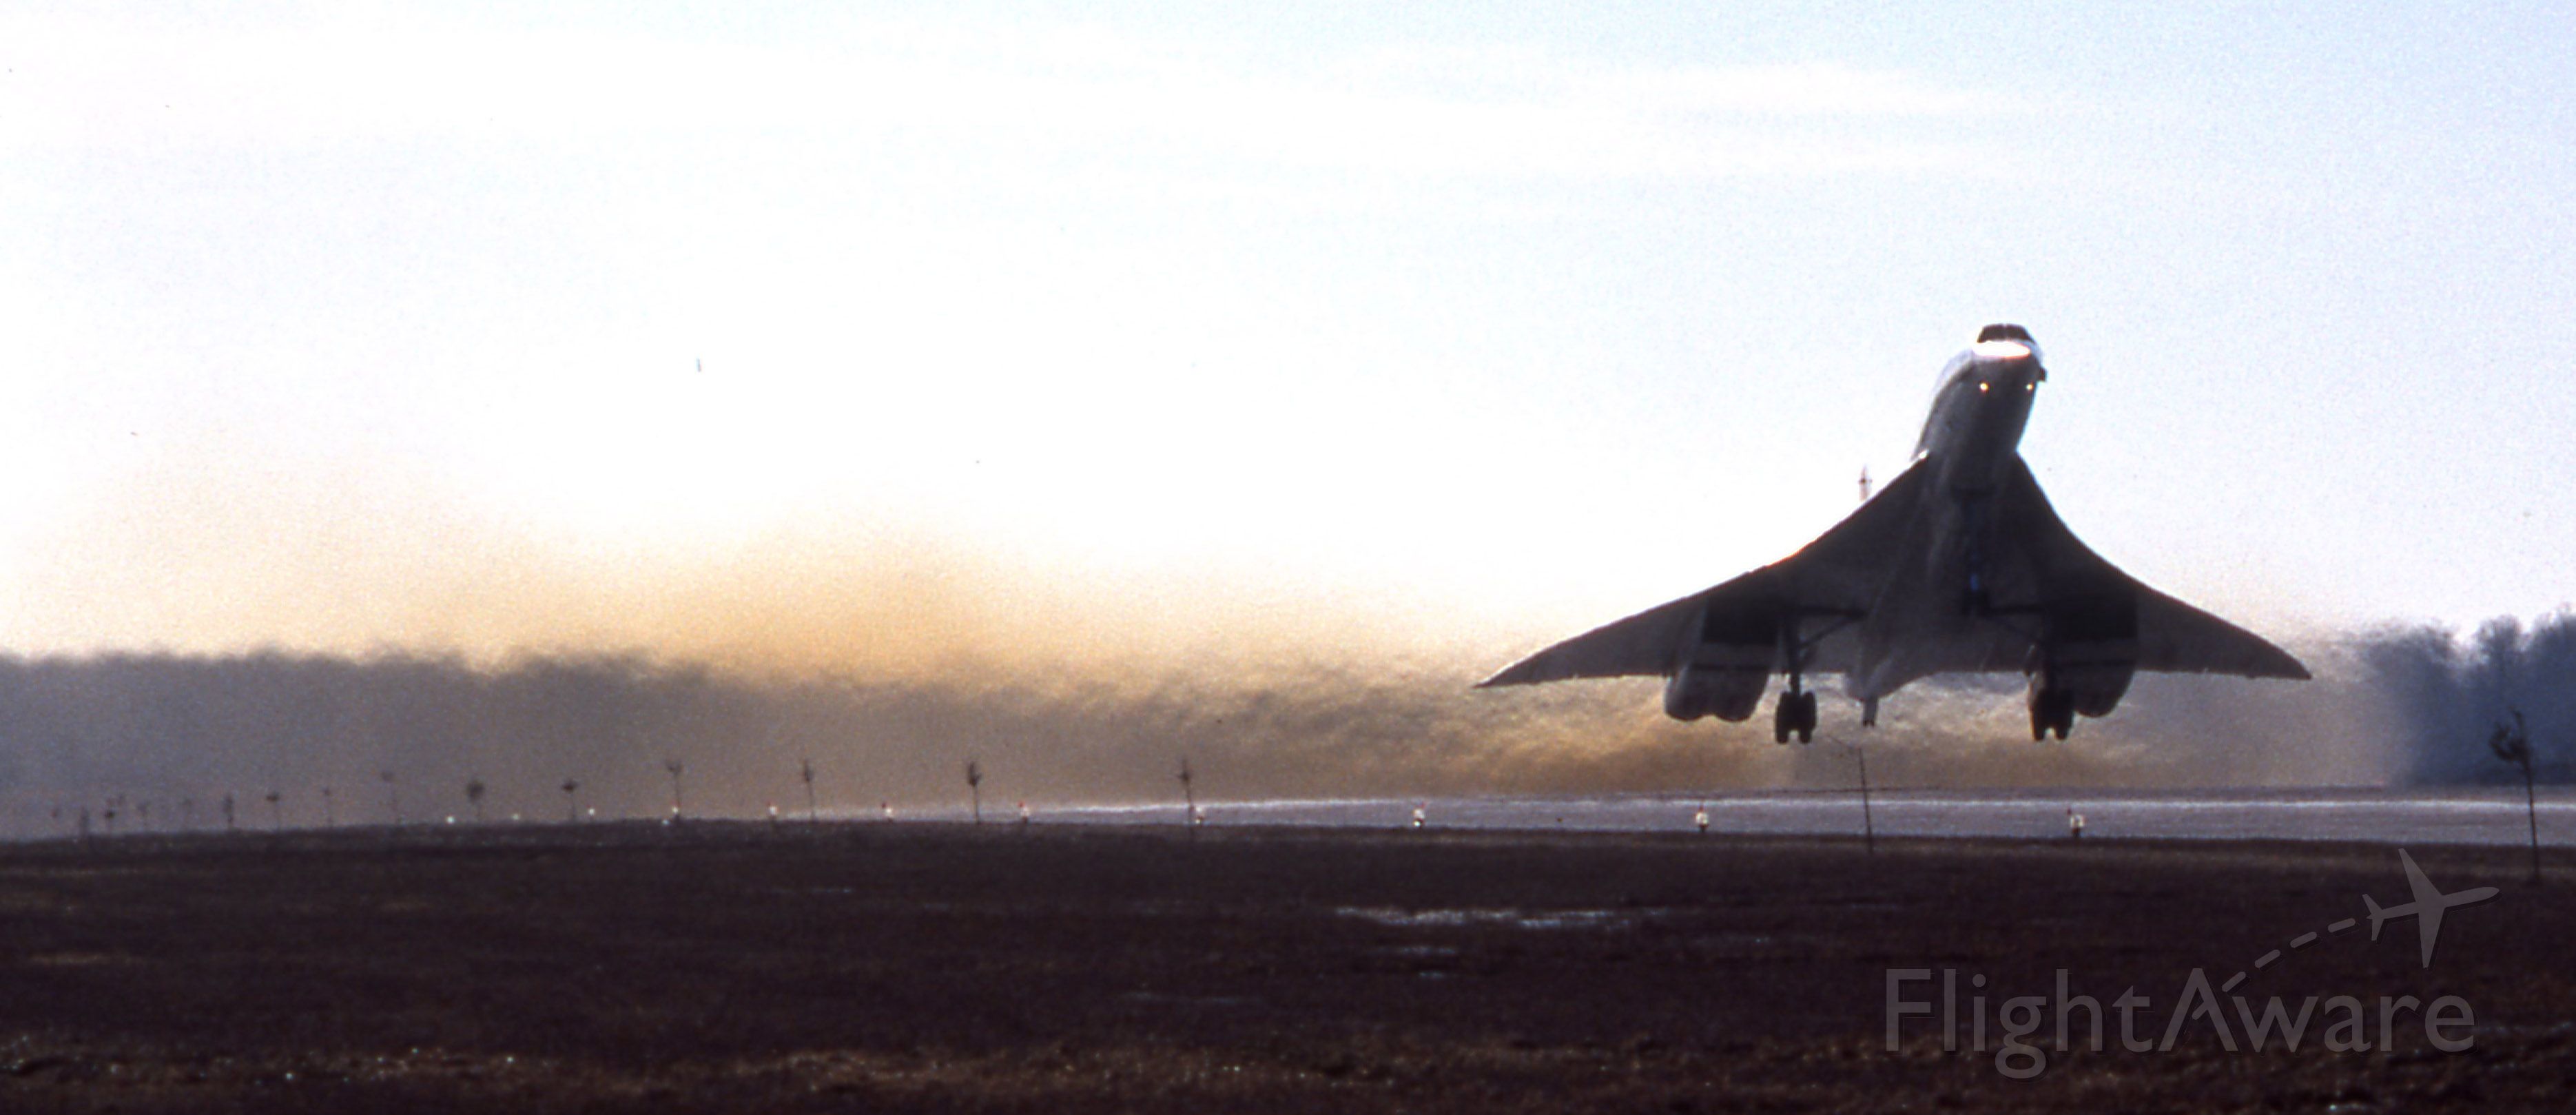 Aerospatiale Concorde (GN94AB) - When KJFK or KIAD and nearby alternates were down because of weather or other factors, the Concordes would fly to CYMX, Mirabel airport near Montreal for fuel.  This photo taken in January 1980 (notice that there is no snow on the ground) is of G-BOAB alias G-N94AB taking off on RWY 06 at YMX on a cold day.  The noise was so loud that my ears rang for a week...